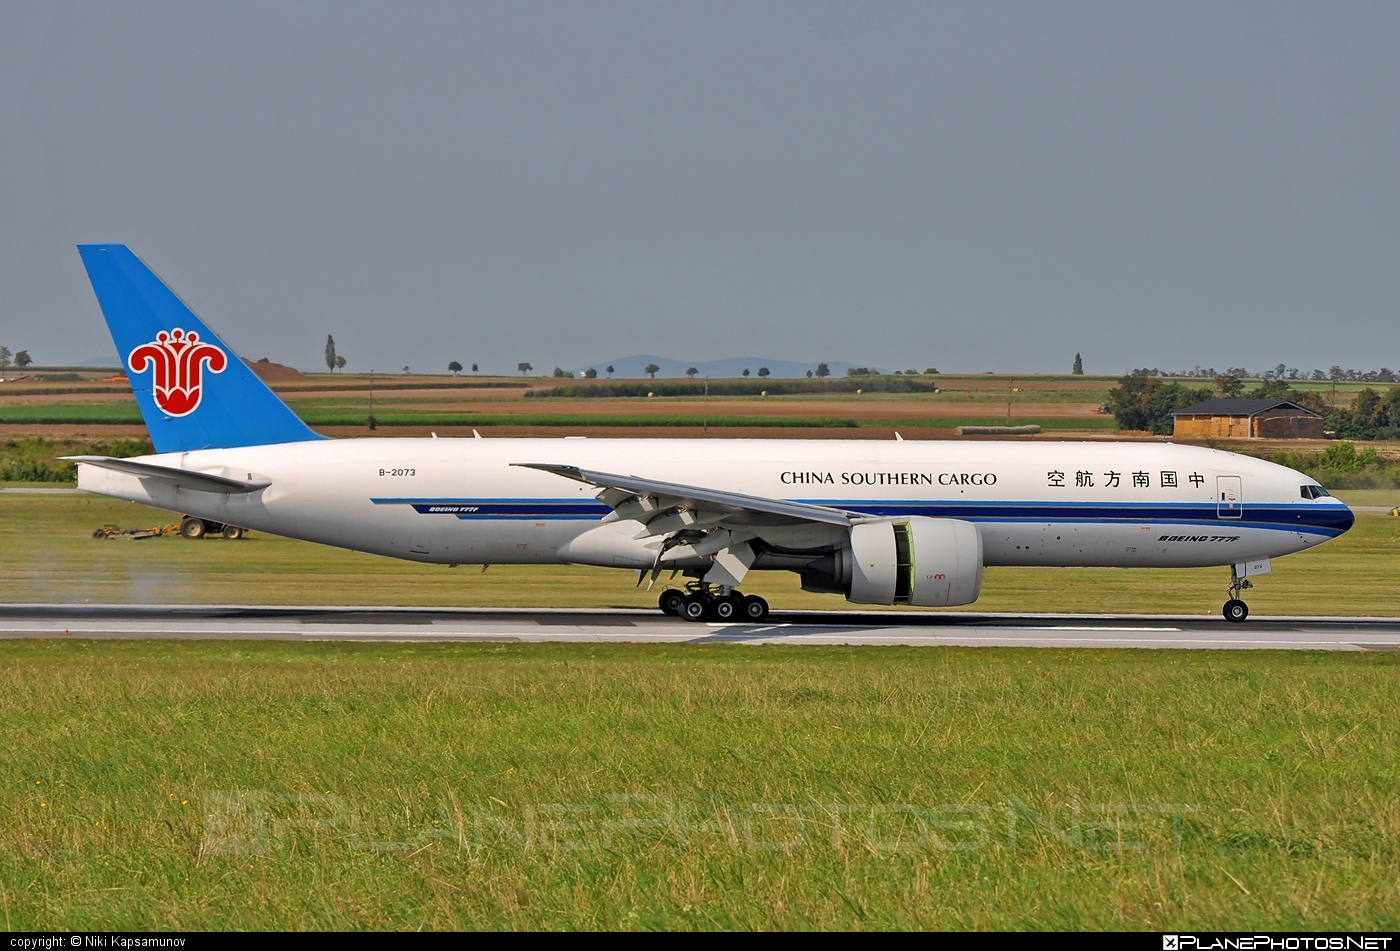 Boeing 777F - B-2073 operated by China Southern Cargo #b777 #b777f #b777freighter #boeing #boeing777 #tripleseven